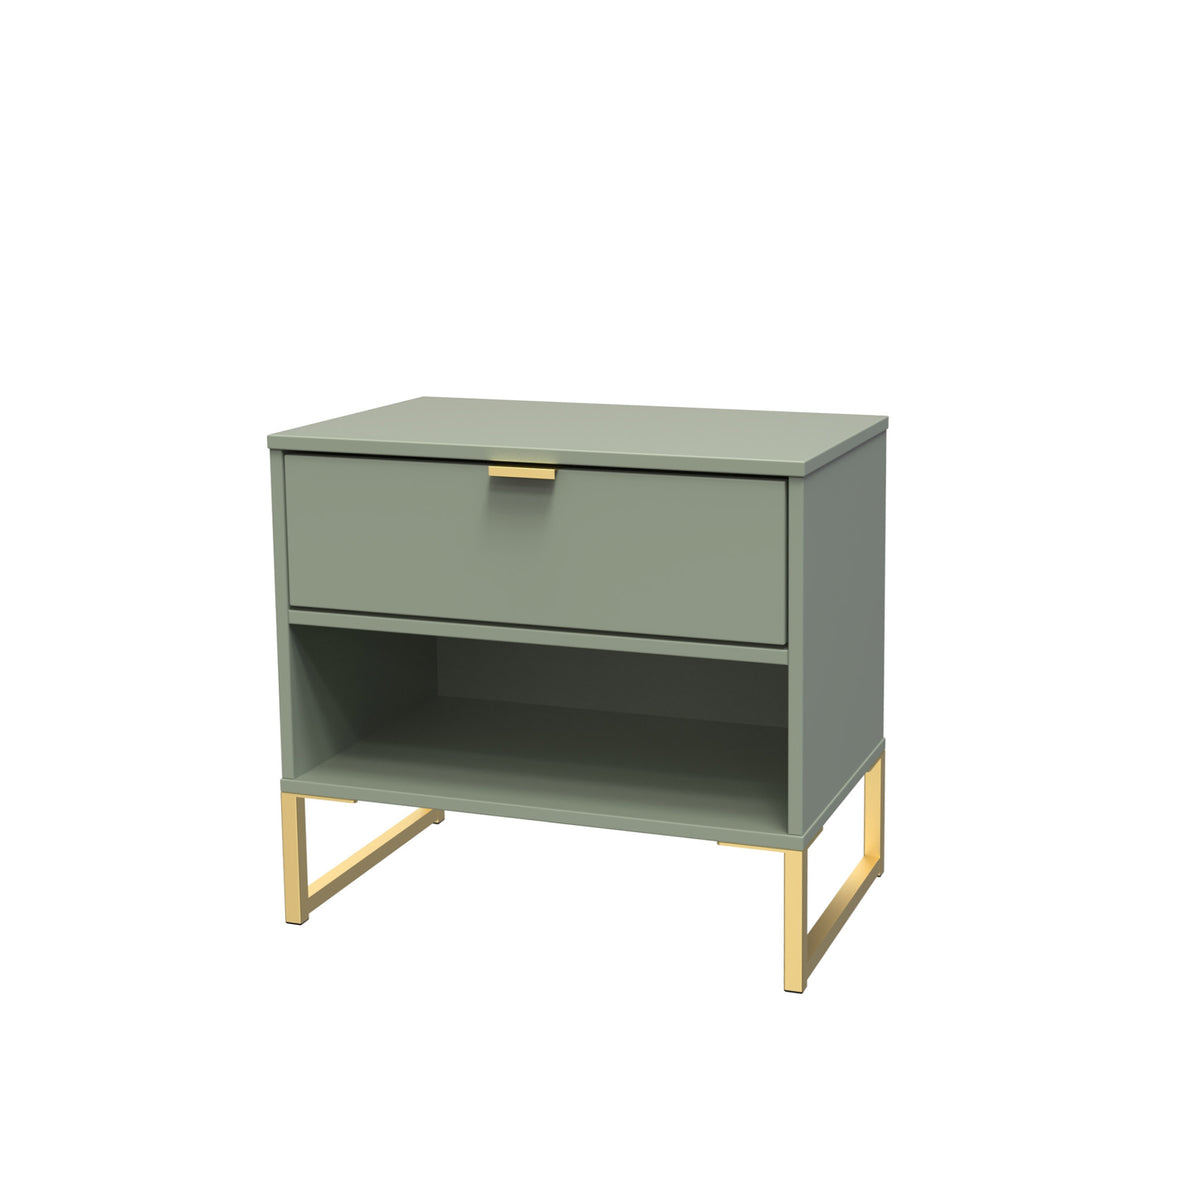 Hudson Olive 1 Drawer with open shelf side table with gold legs